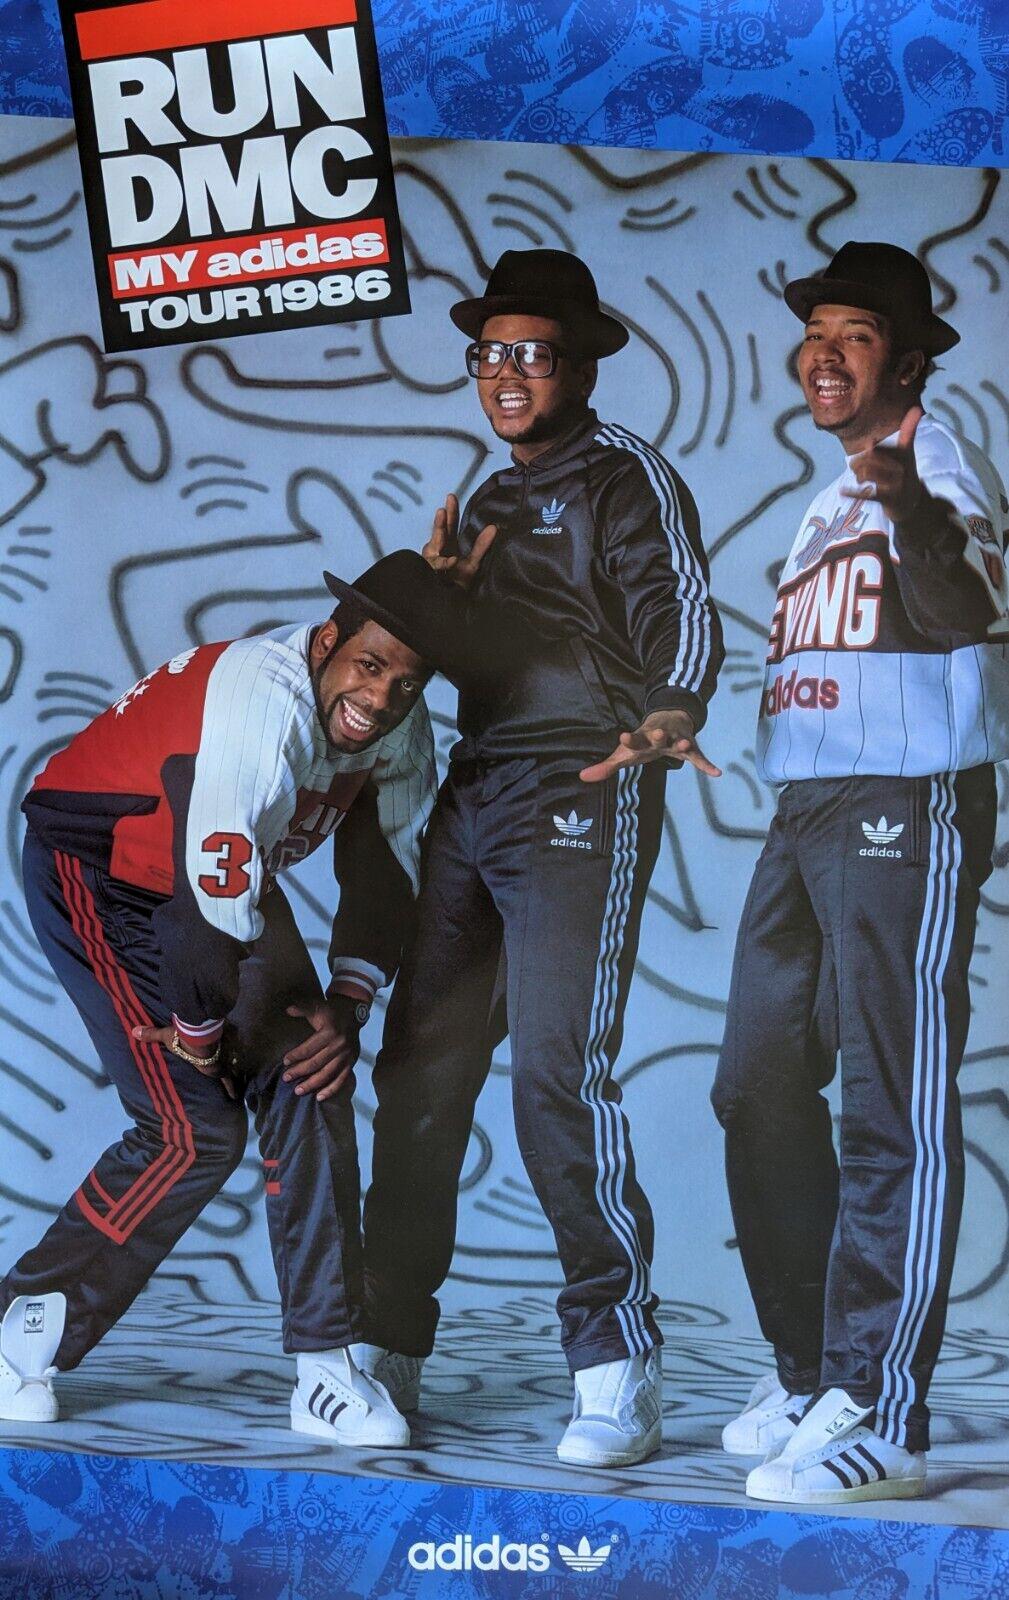 Keith Haring Run DMC Adidas Poster 1986:
Rare original Keith Haring illustrated Run DMC promotional poster published in collaboration with Adidas and Keith Haring. The New York based band Run DMC was one of the first hip-hop and rap bands to reach a